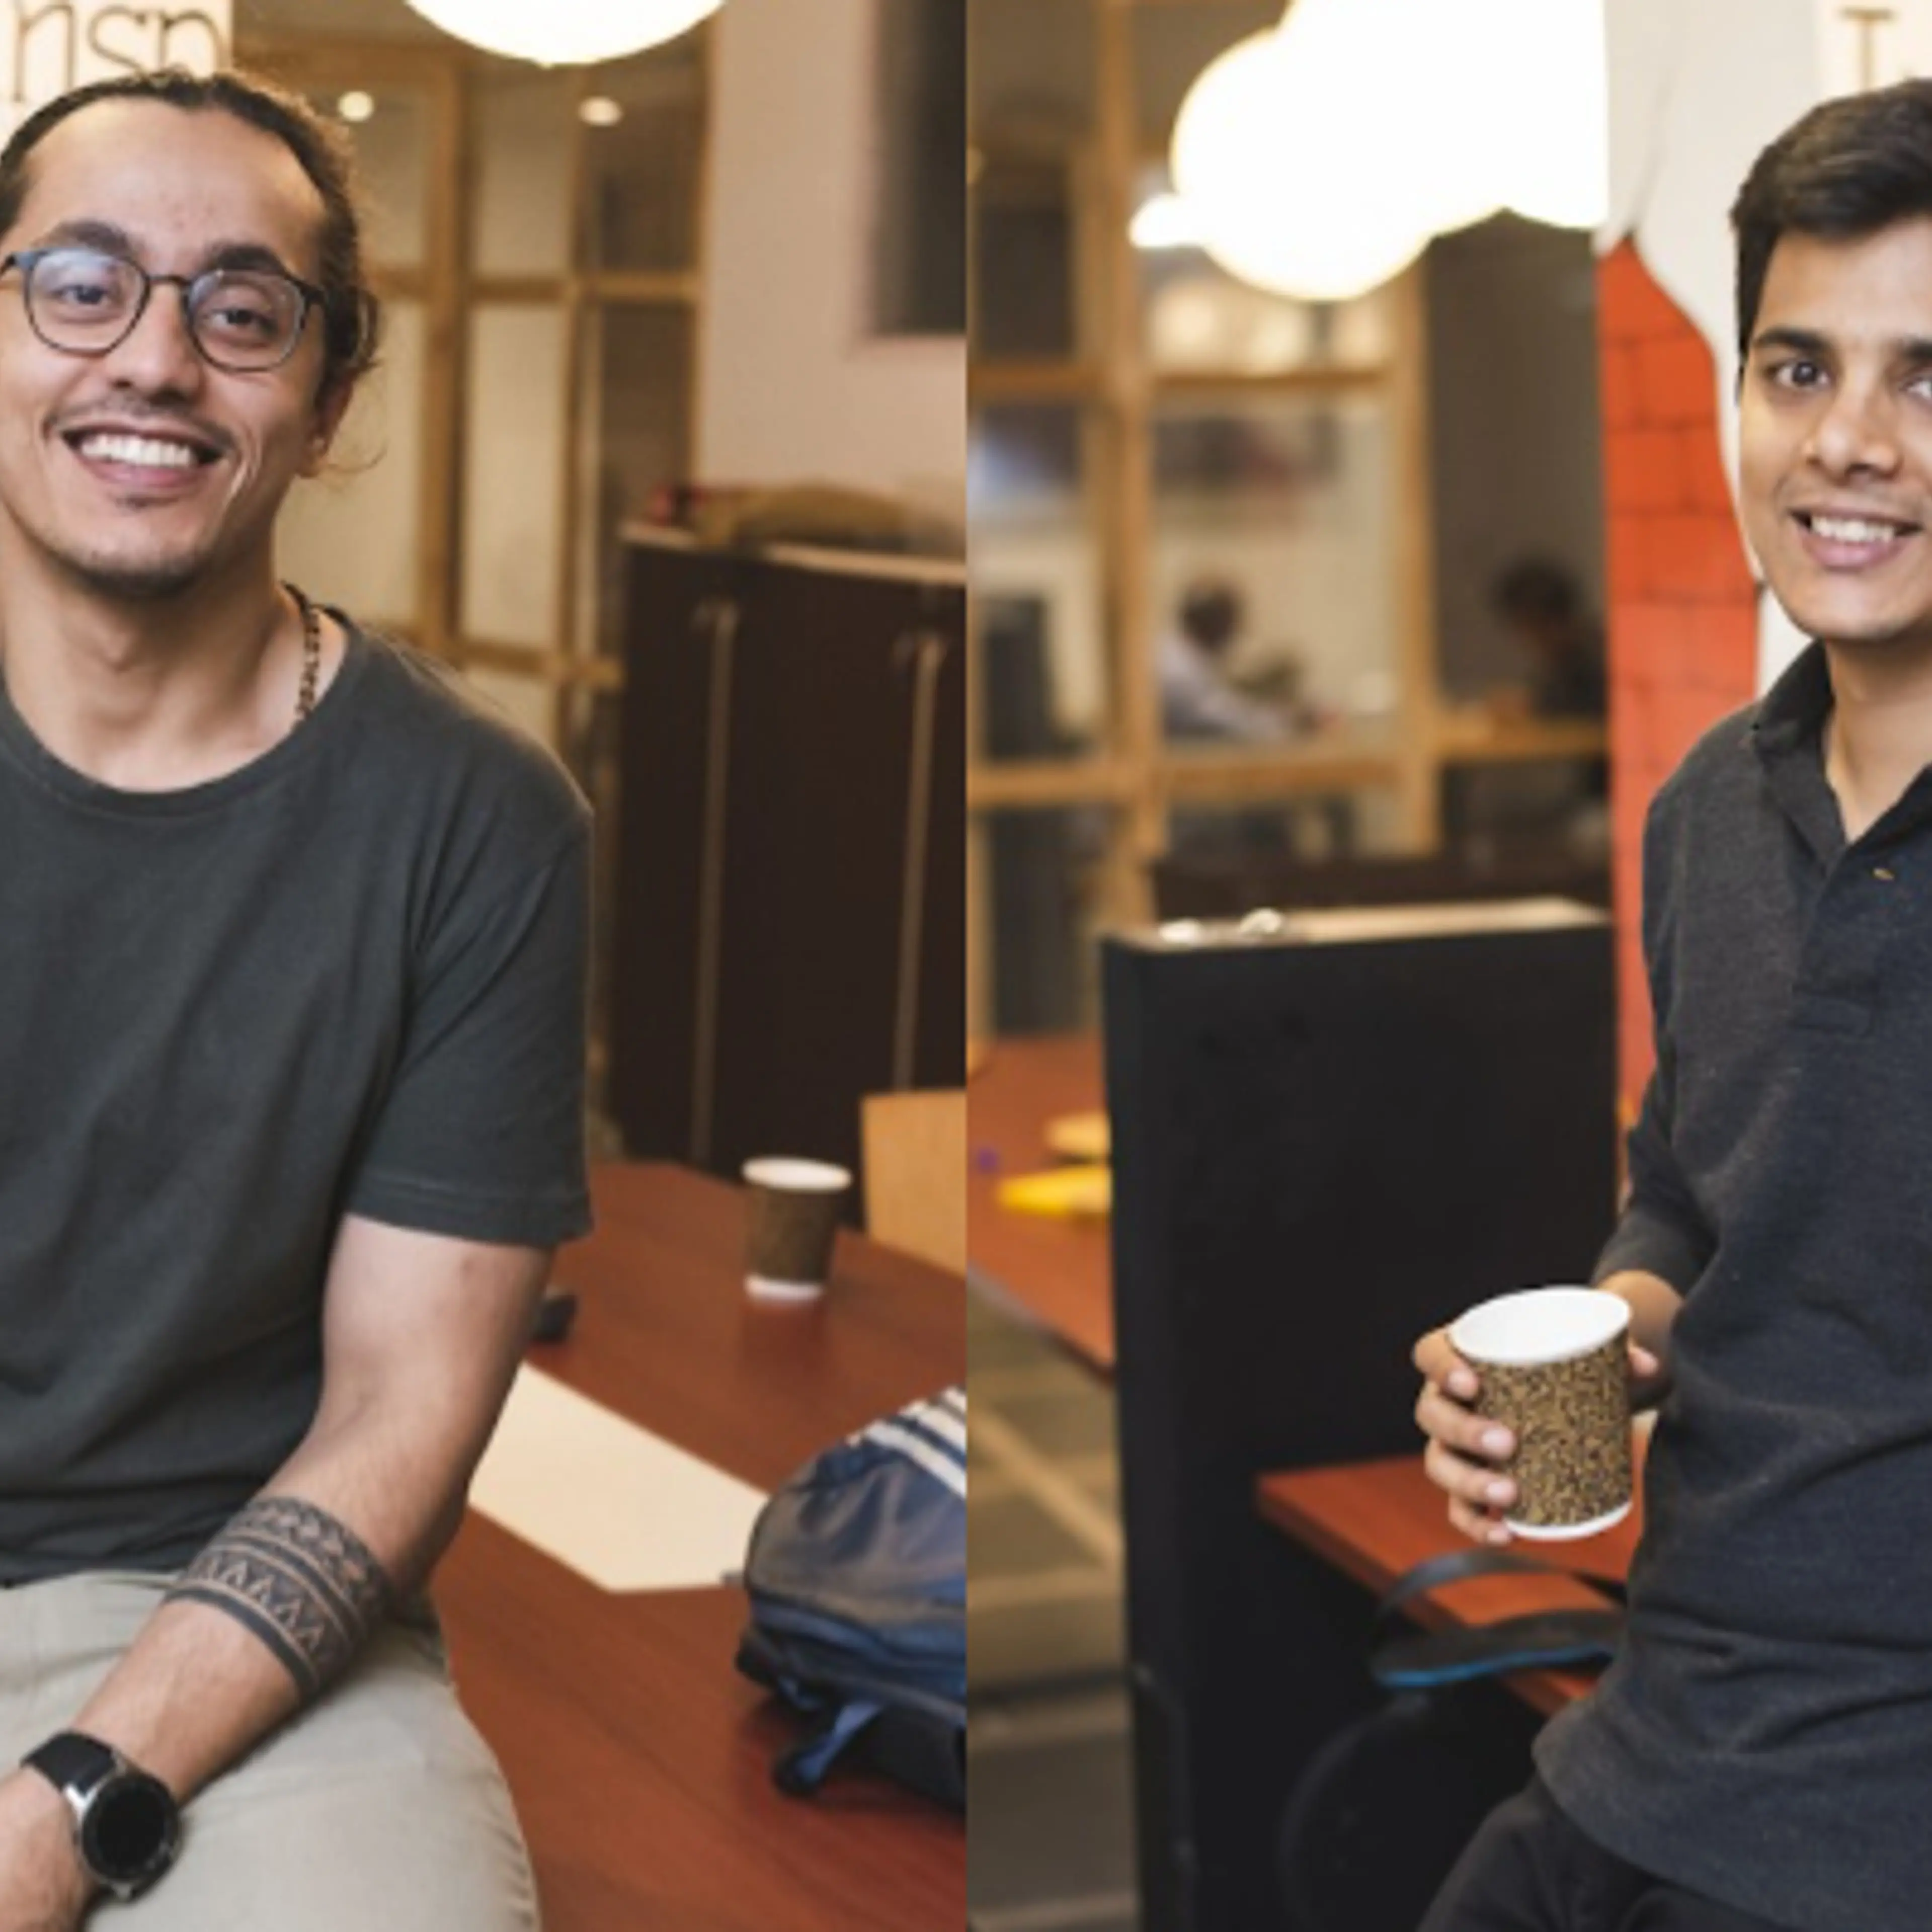 These entrepreneurs aim to bring cafe-like experience of freshly brewed coffee to coffee lovers